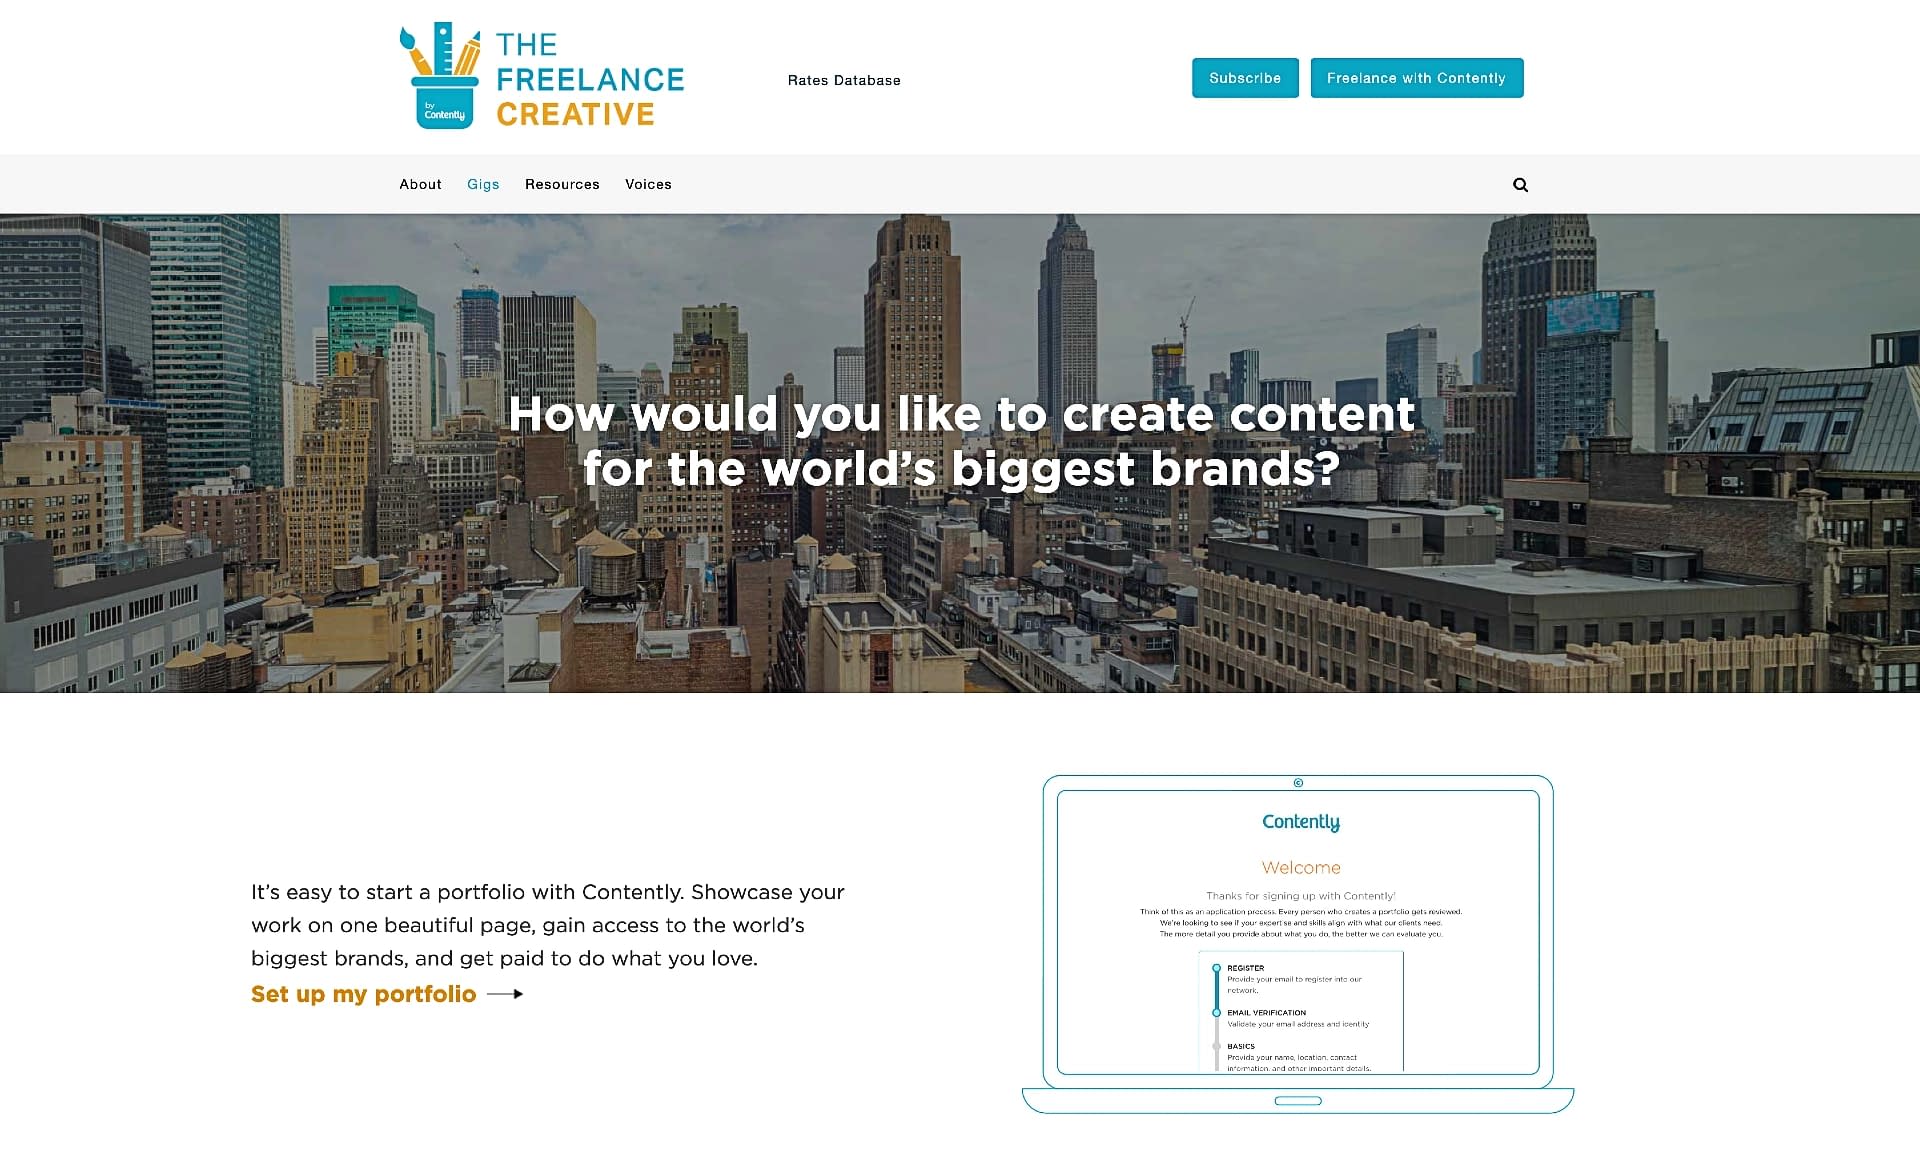 The Freelance Creative by Contently.